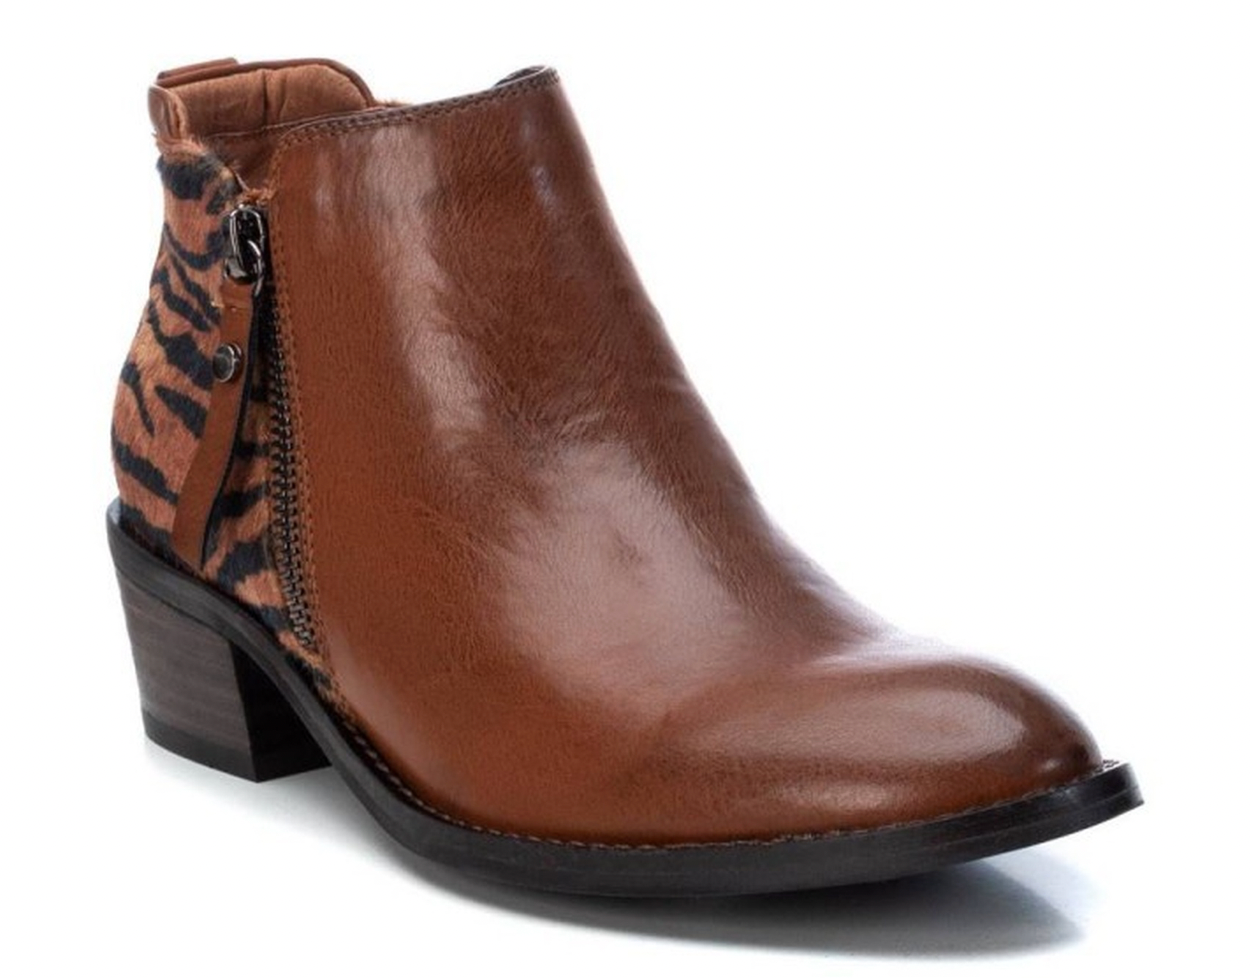 Xti Womens Heeled Ankle Boots - Camel